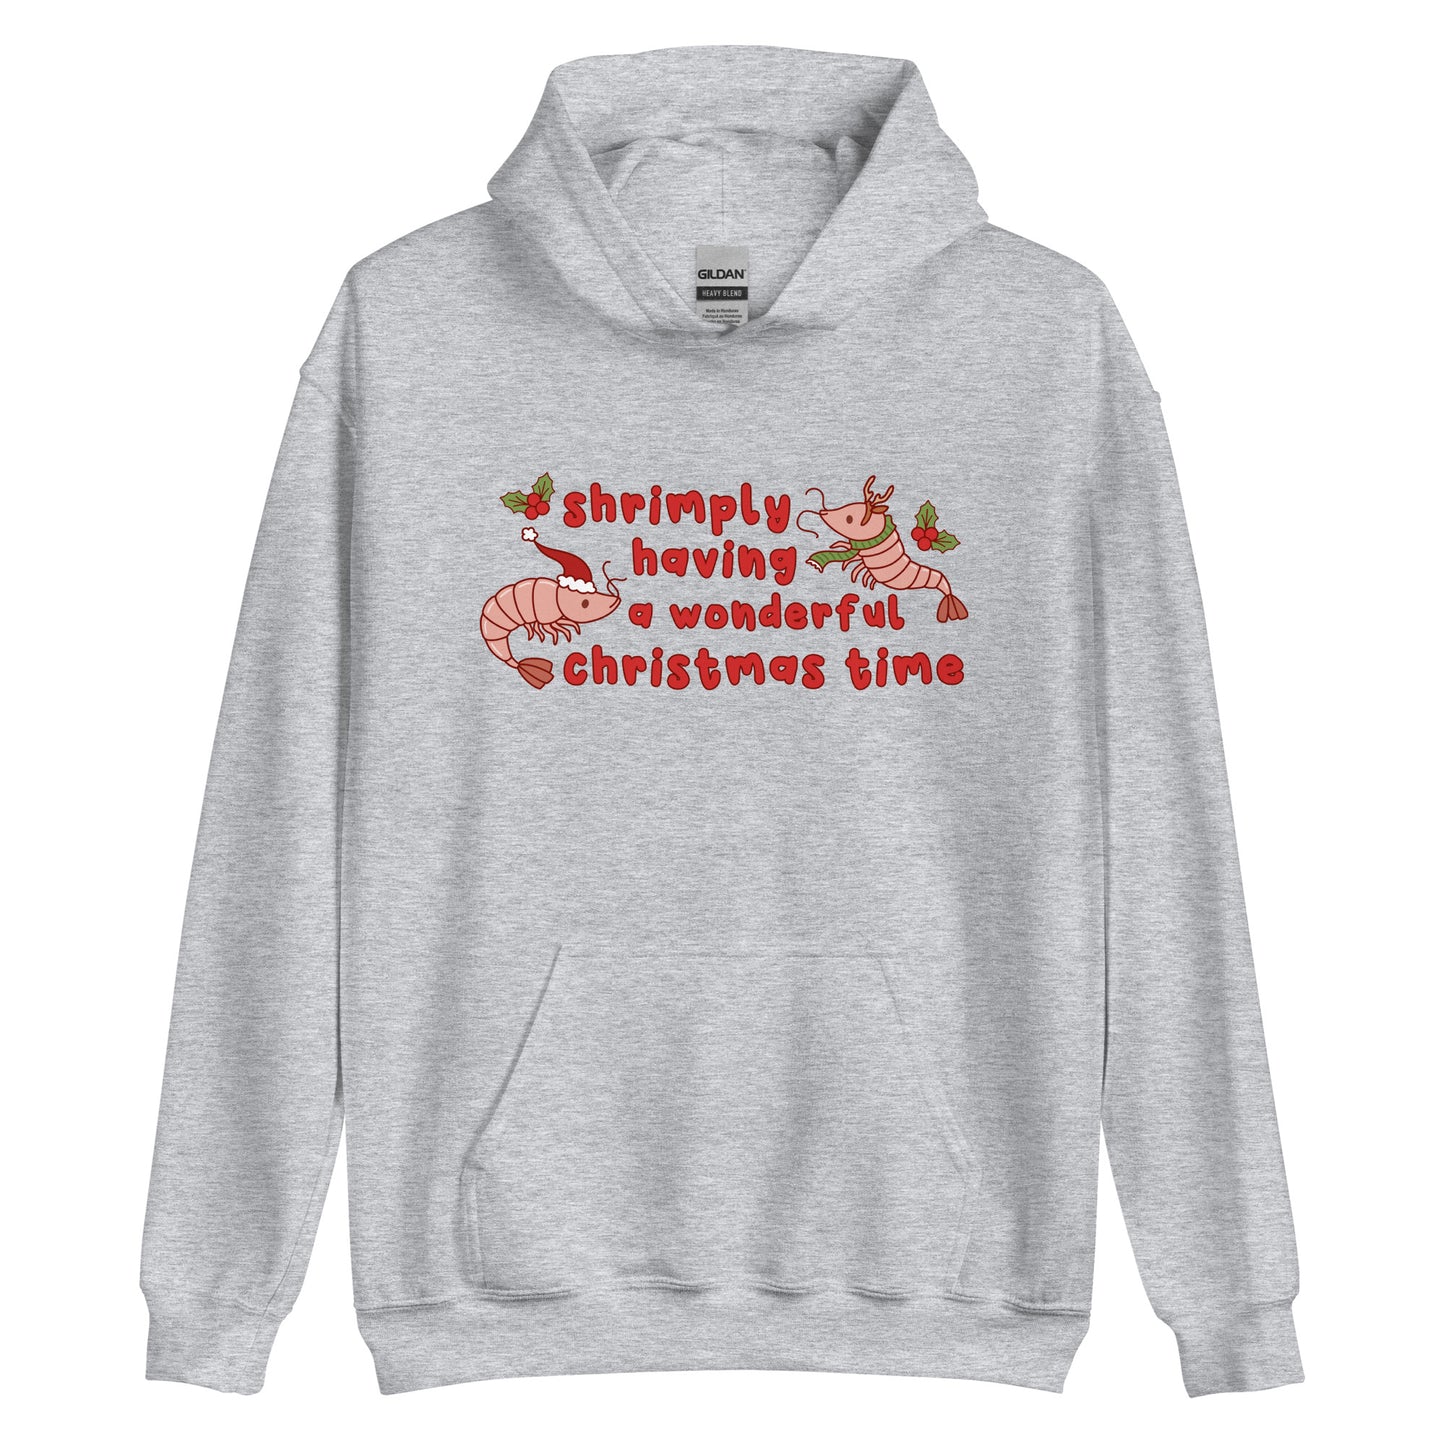 A grey hooded sweatshirt featuring an illustration of two festive shrimp - one with a Santa hat, and one with reindeer antlers. Text between the shrimp reads "shrimply having a wonderful Christmas time".